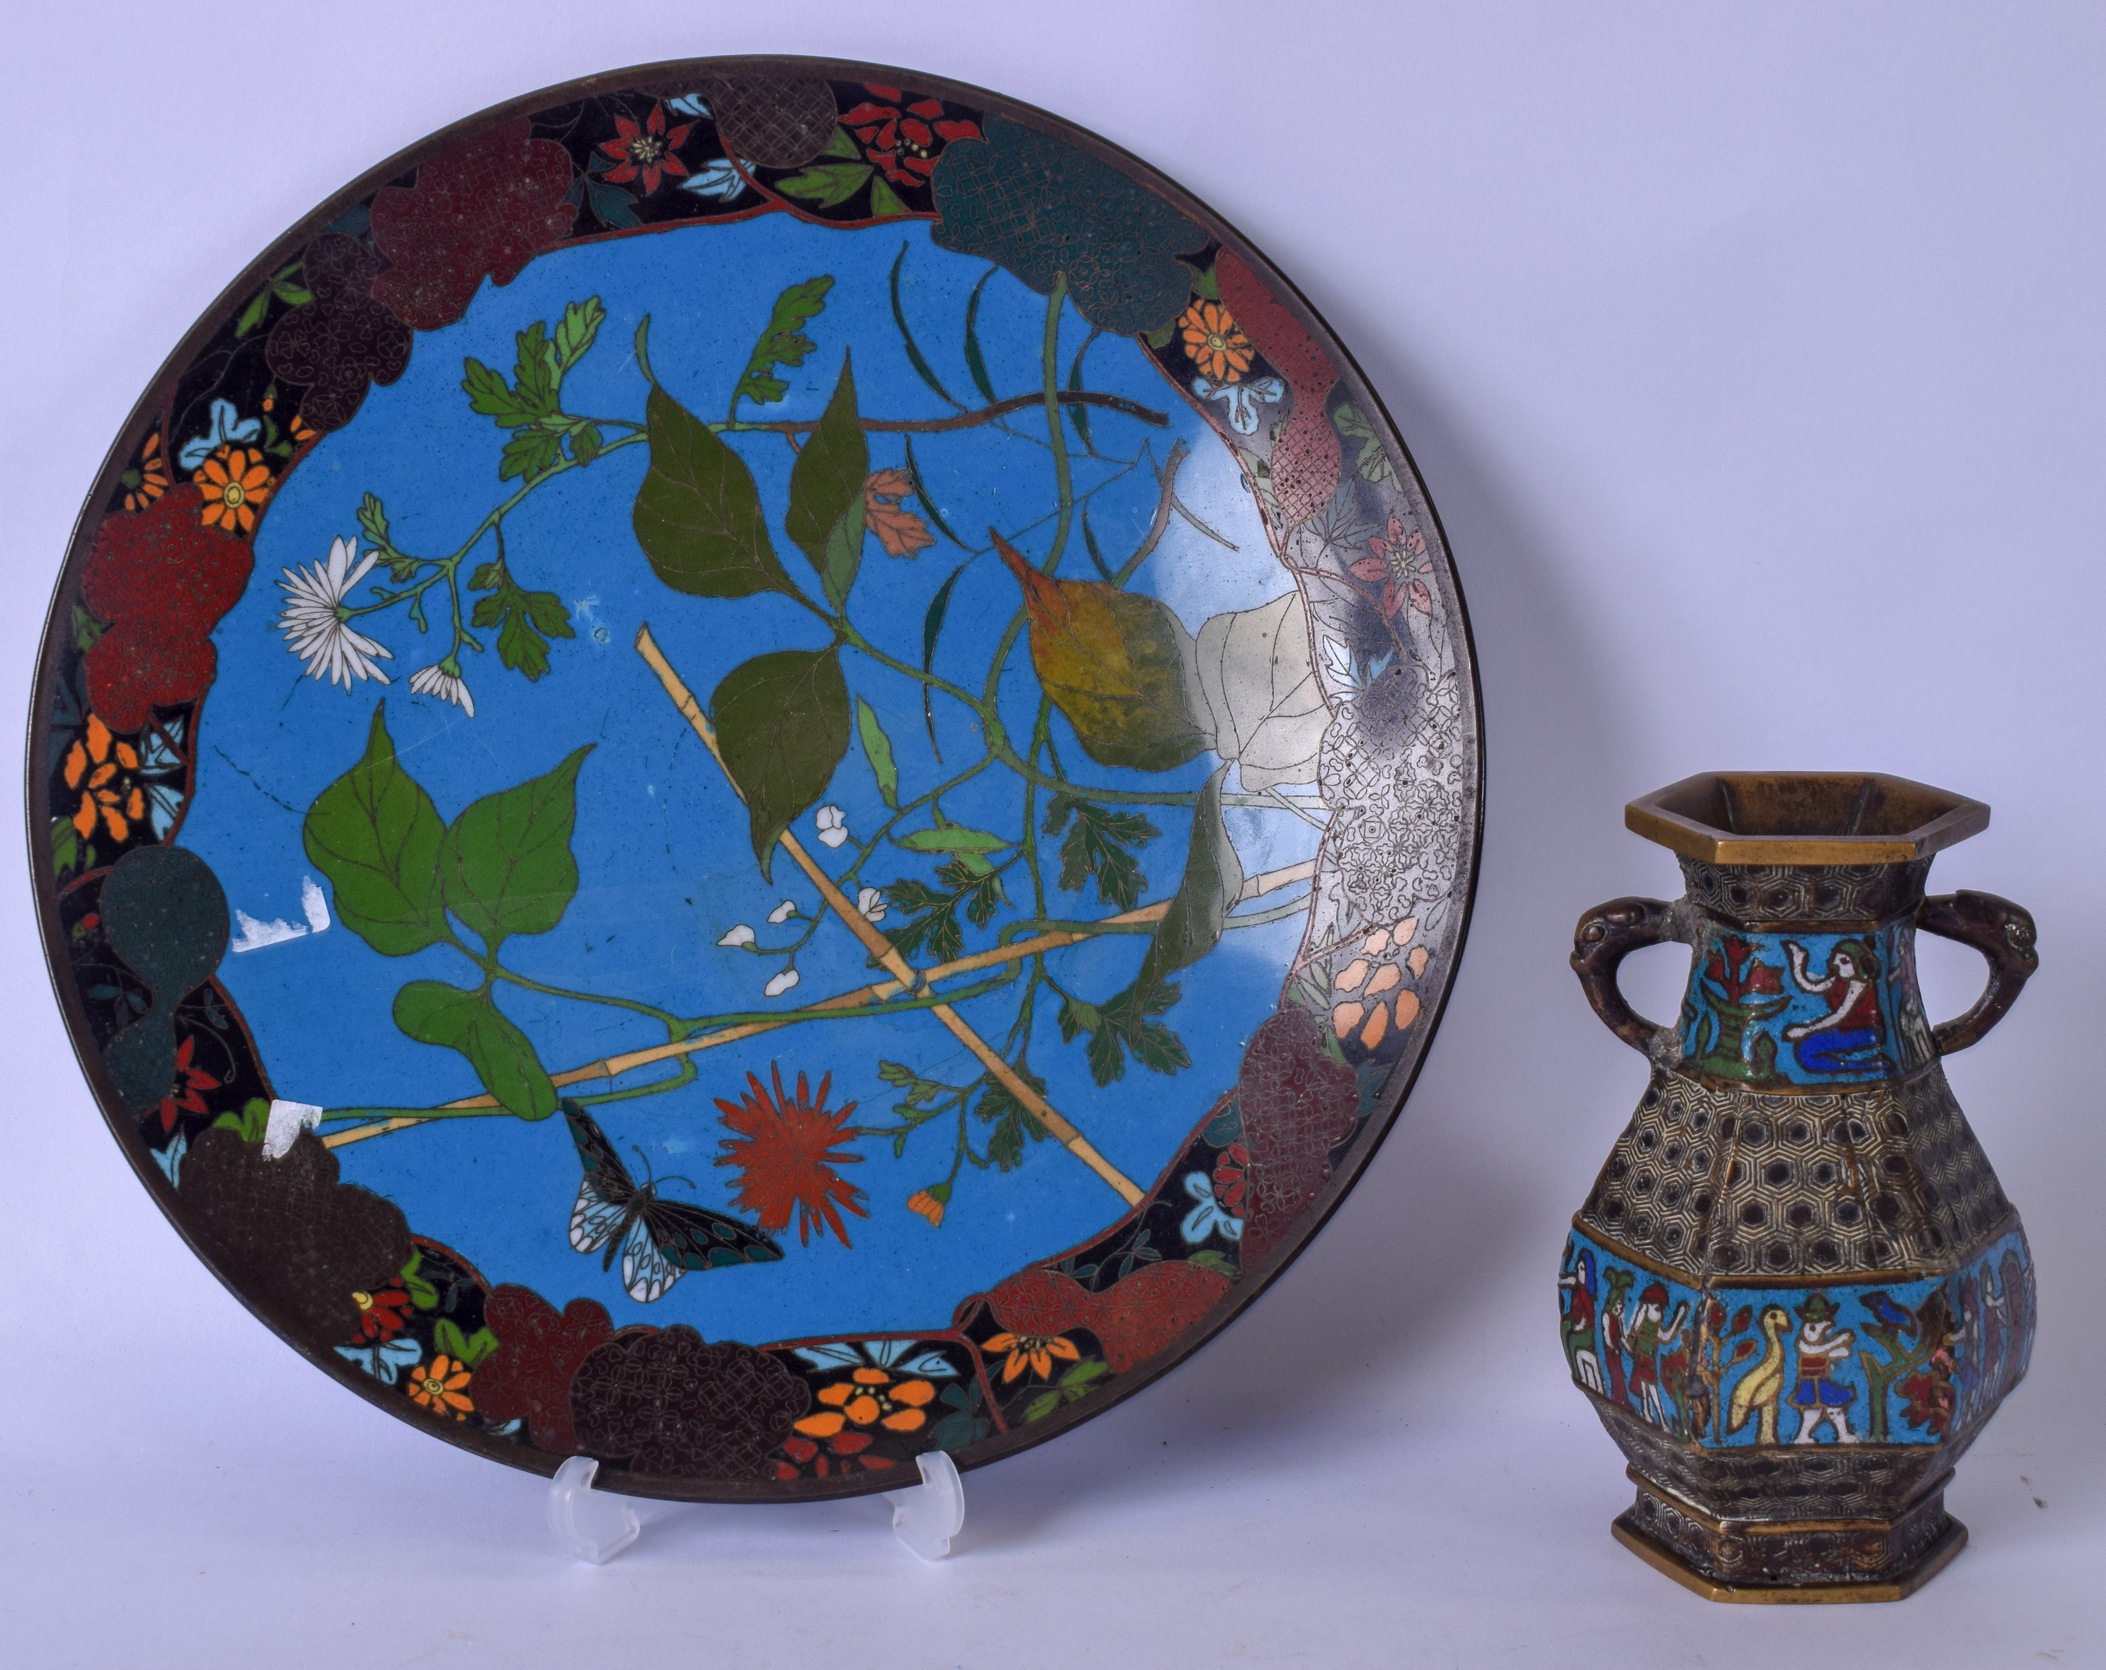 AN EARLY 20TH CENTURY JAPANESE CLOISONNE ENAMEL DISH, together with a bronze champlevé enamel vase